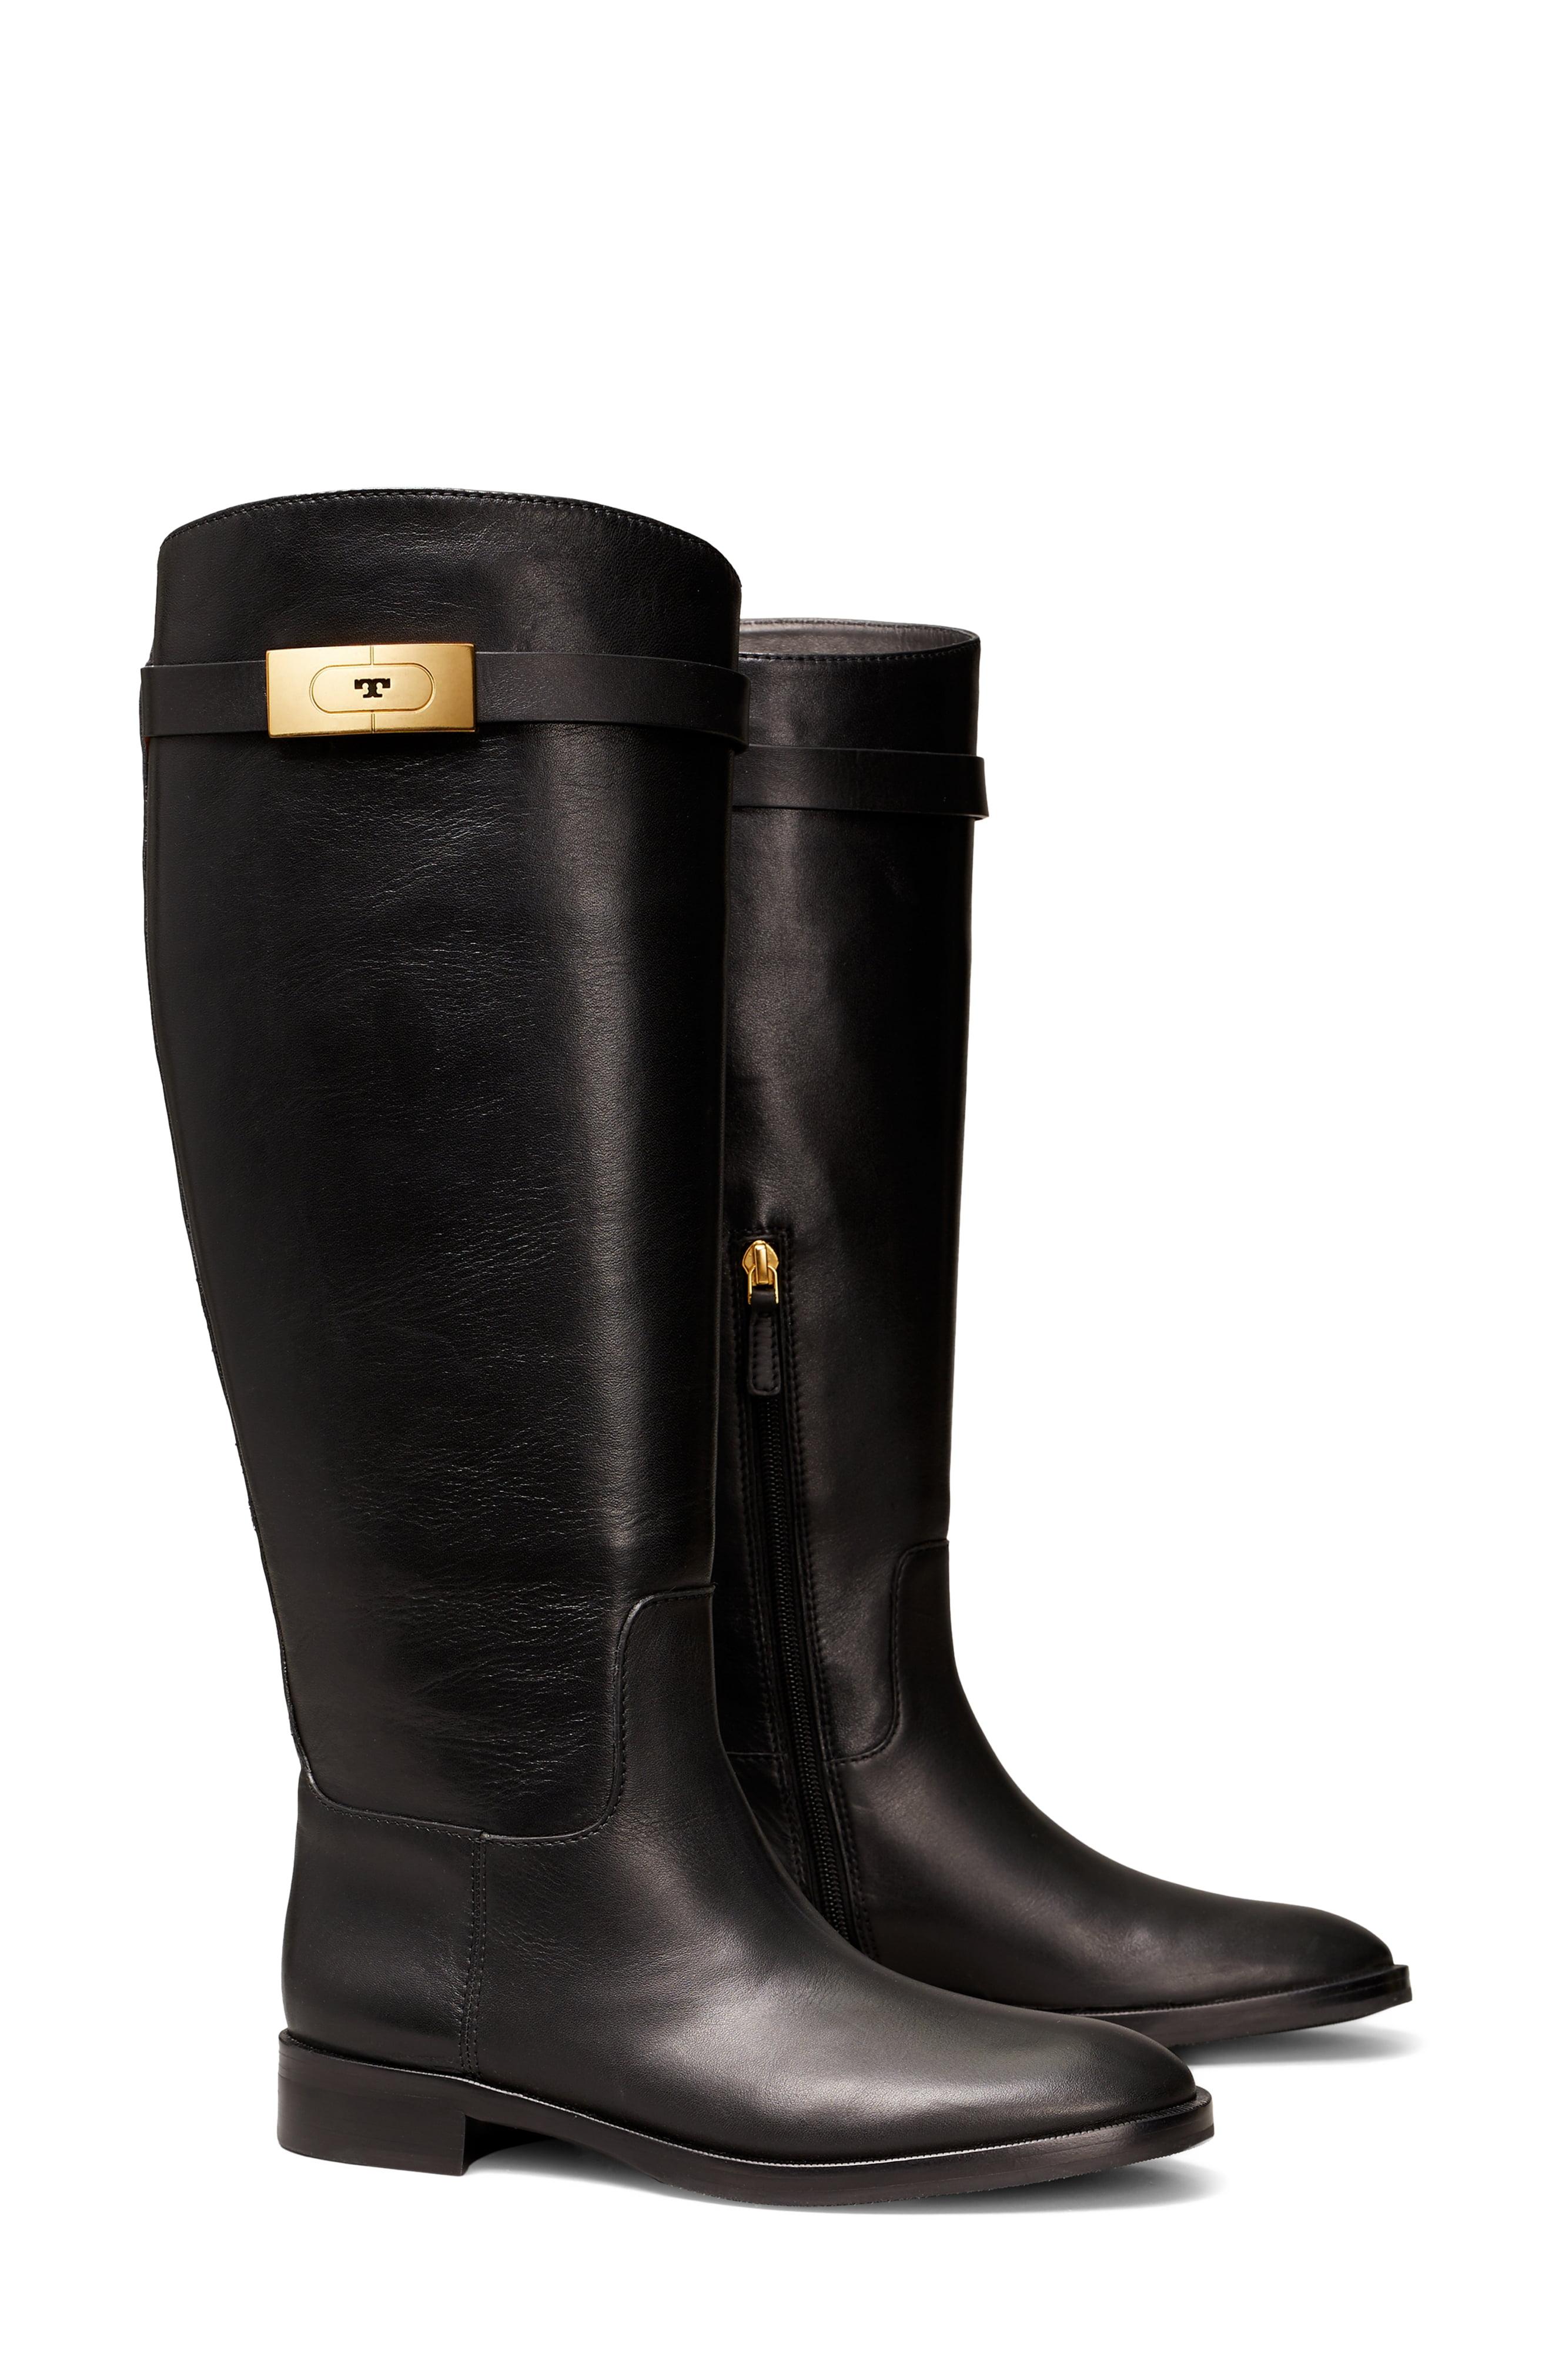 Tory Burch Leather T-hardware Riding Boot in Black - Lyst